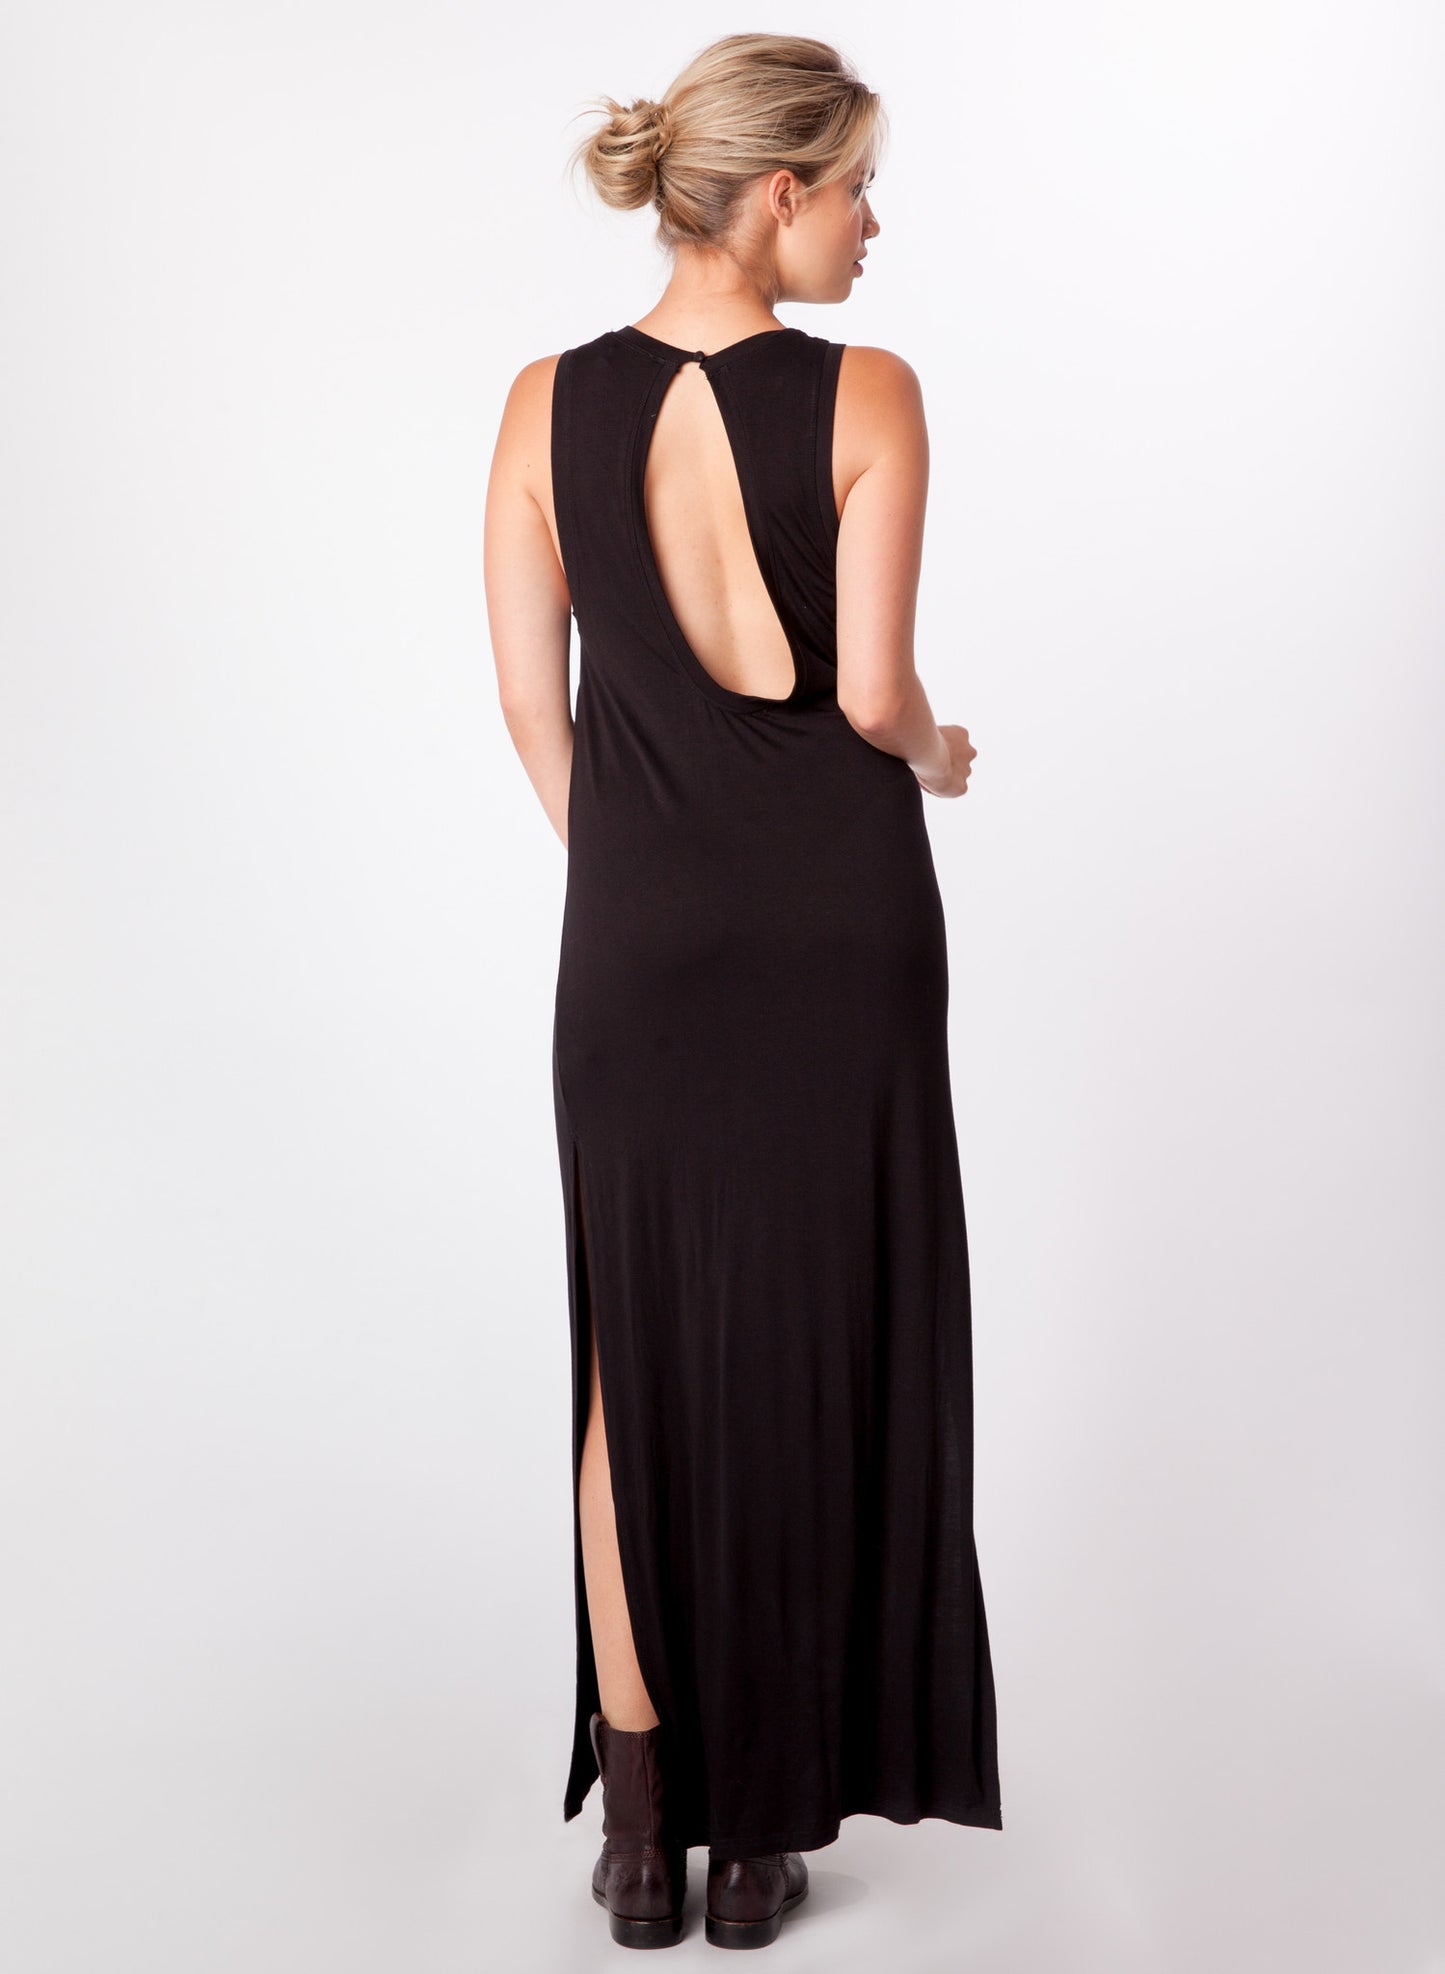 The Fifth Adore You Maxi Dress